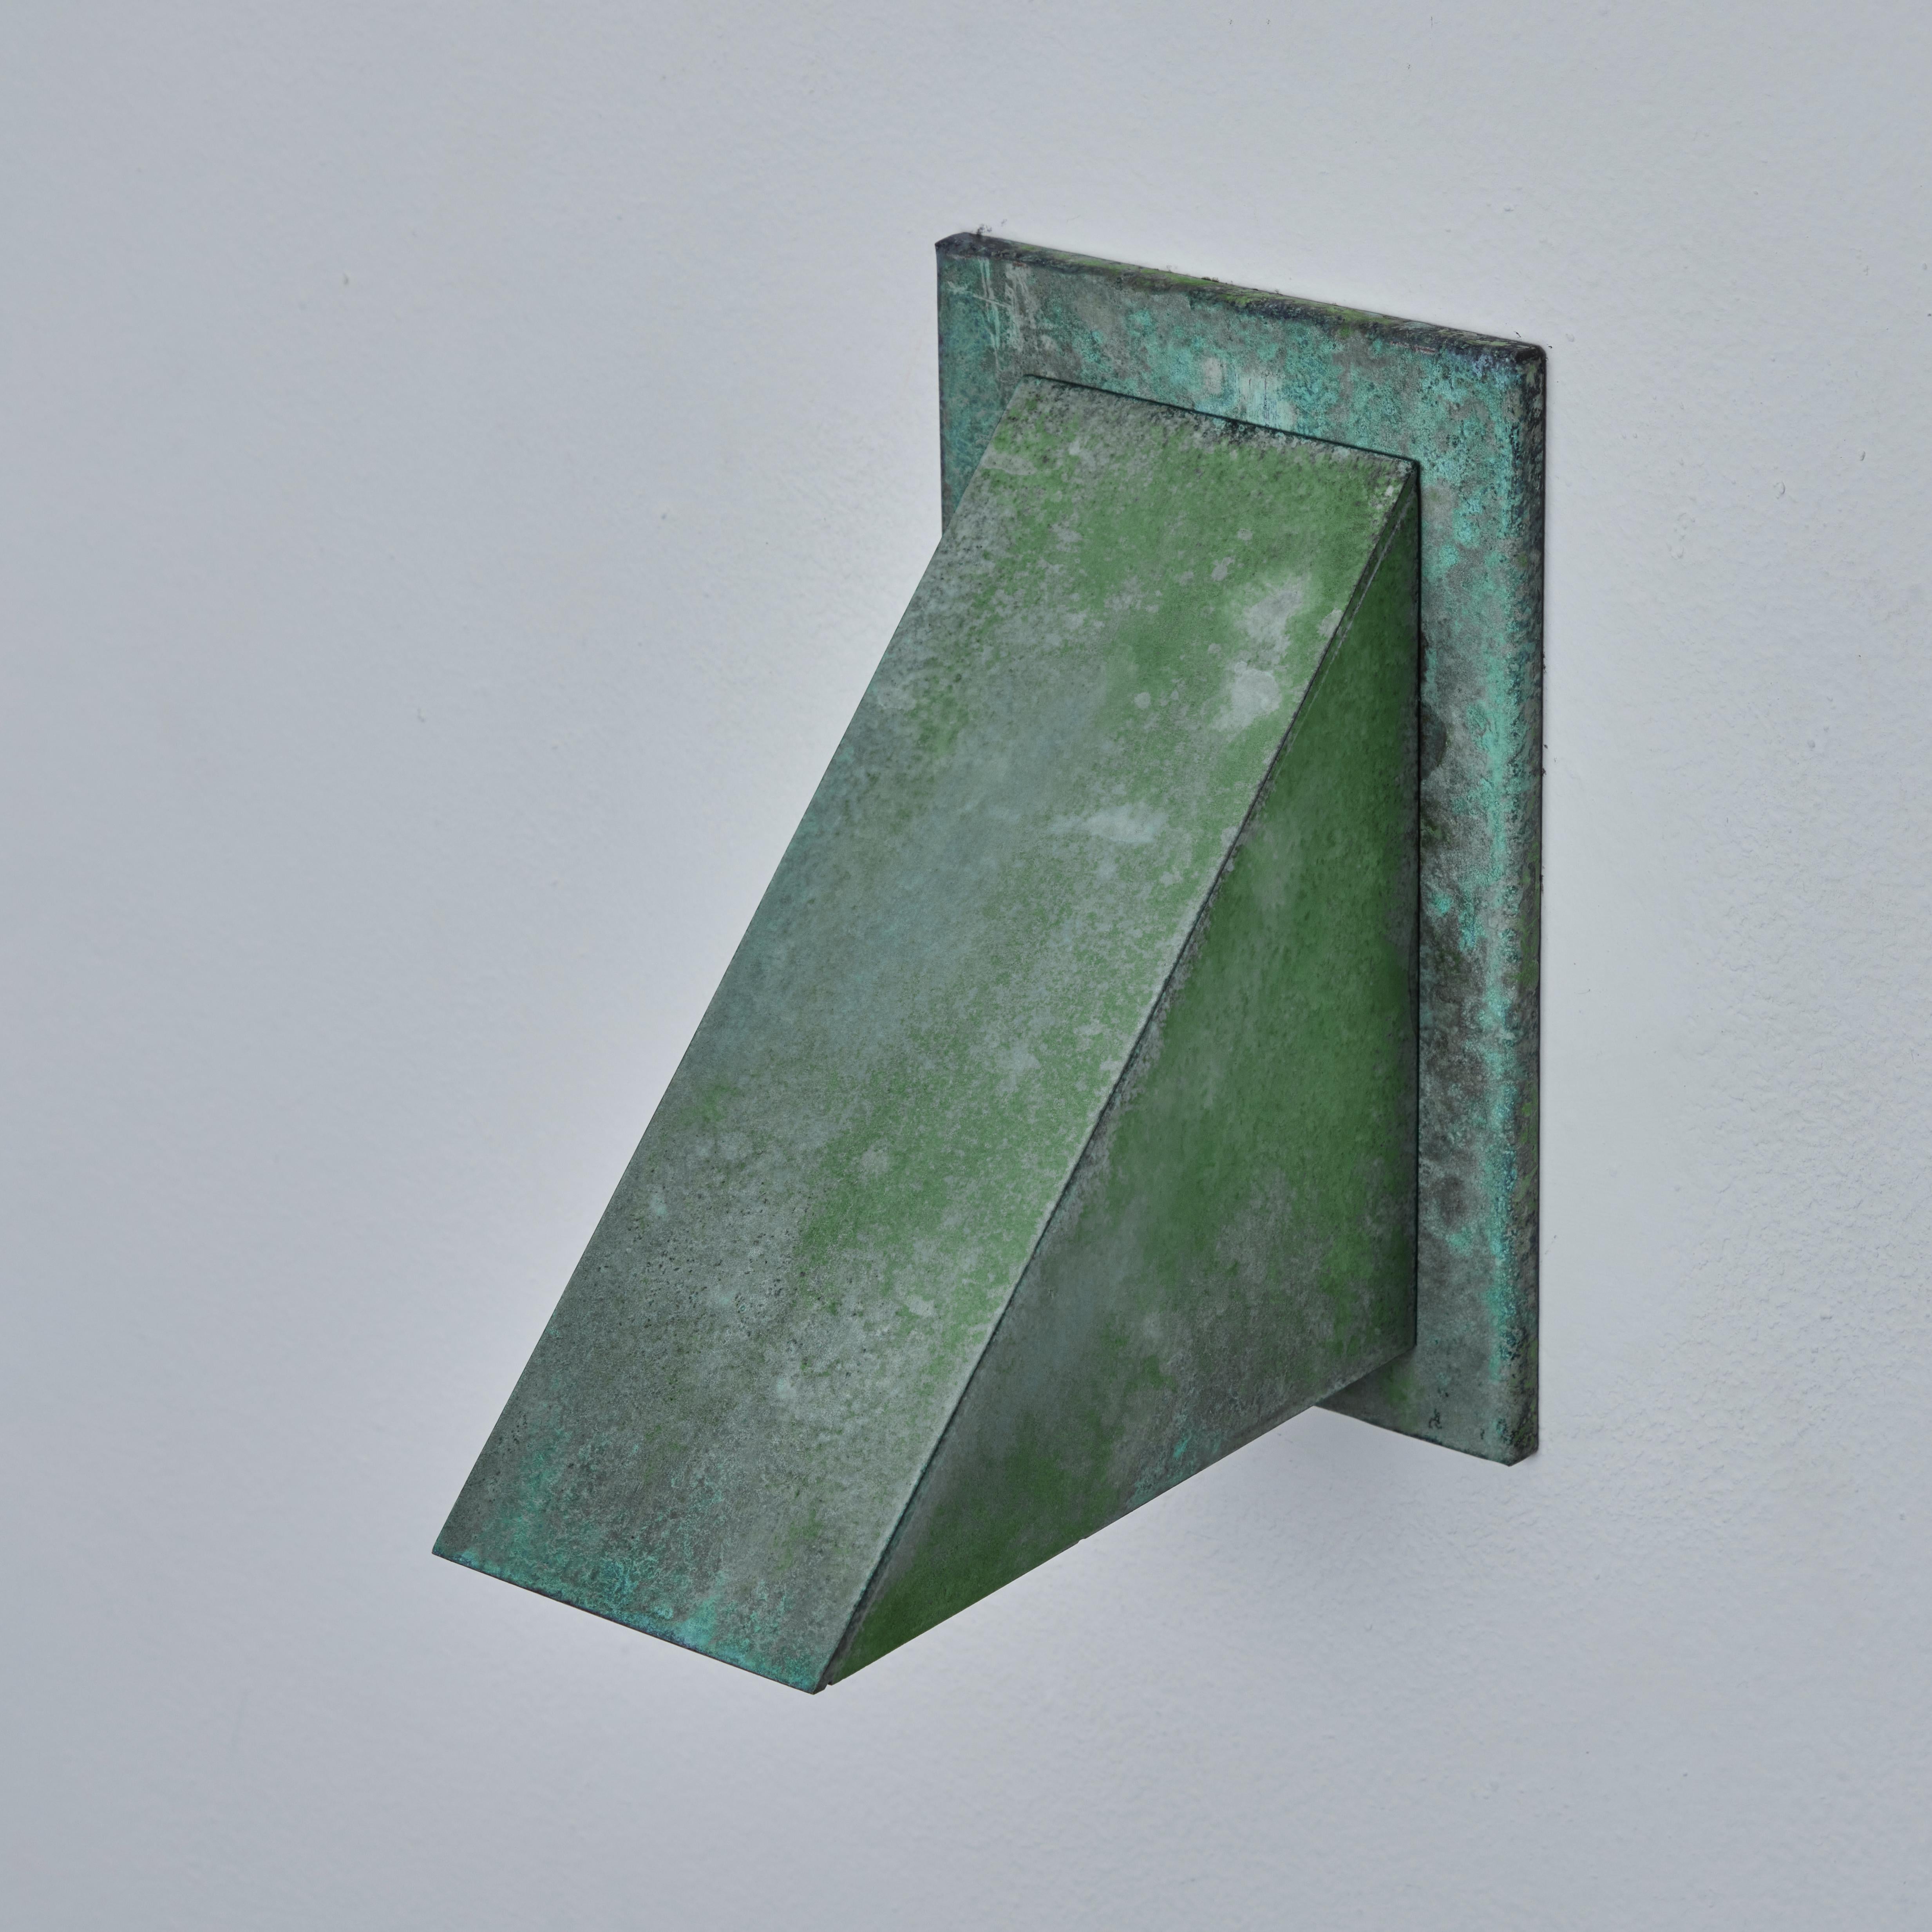 Pair of Jonas Bohlin 'Oxid' Verdigris Patinated Outdoor Wall Lights for Örsjö. Executed in rich verdigris patinated metal with an opaline glass diffuser. An incredibly refined and clean geometric design that is quintessentially Scandinavian. For